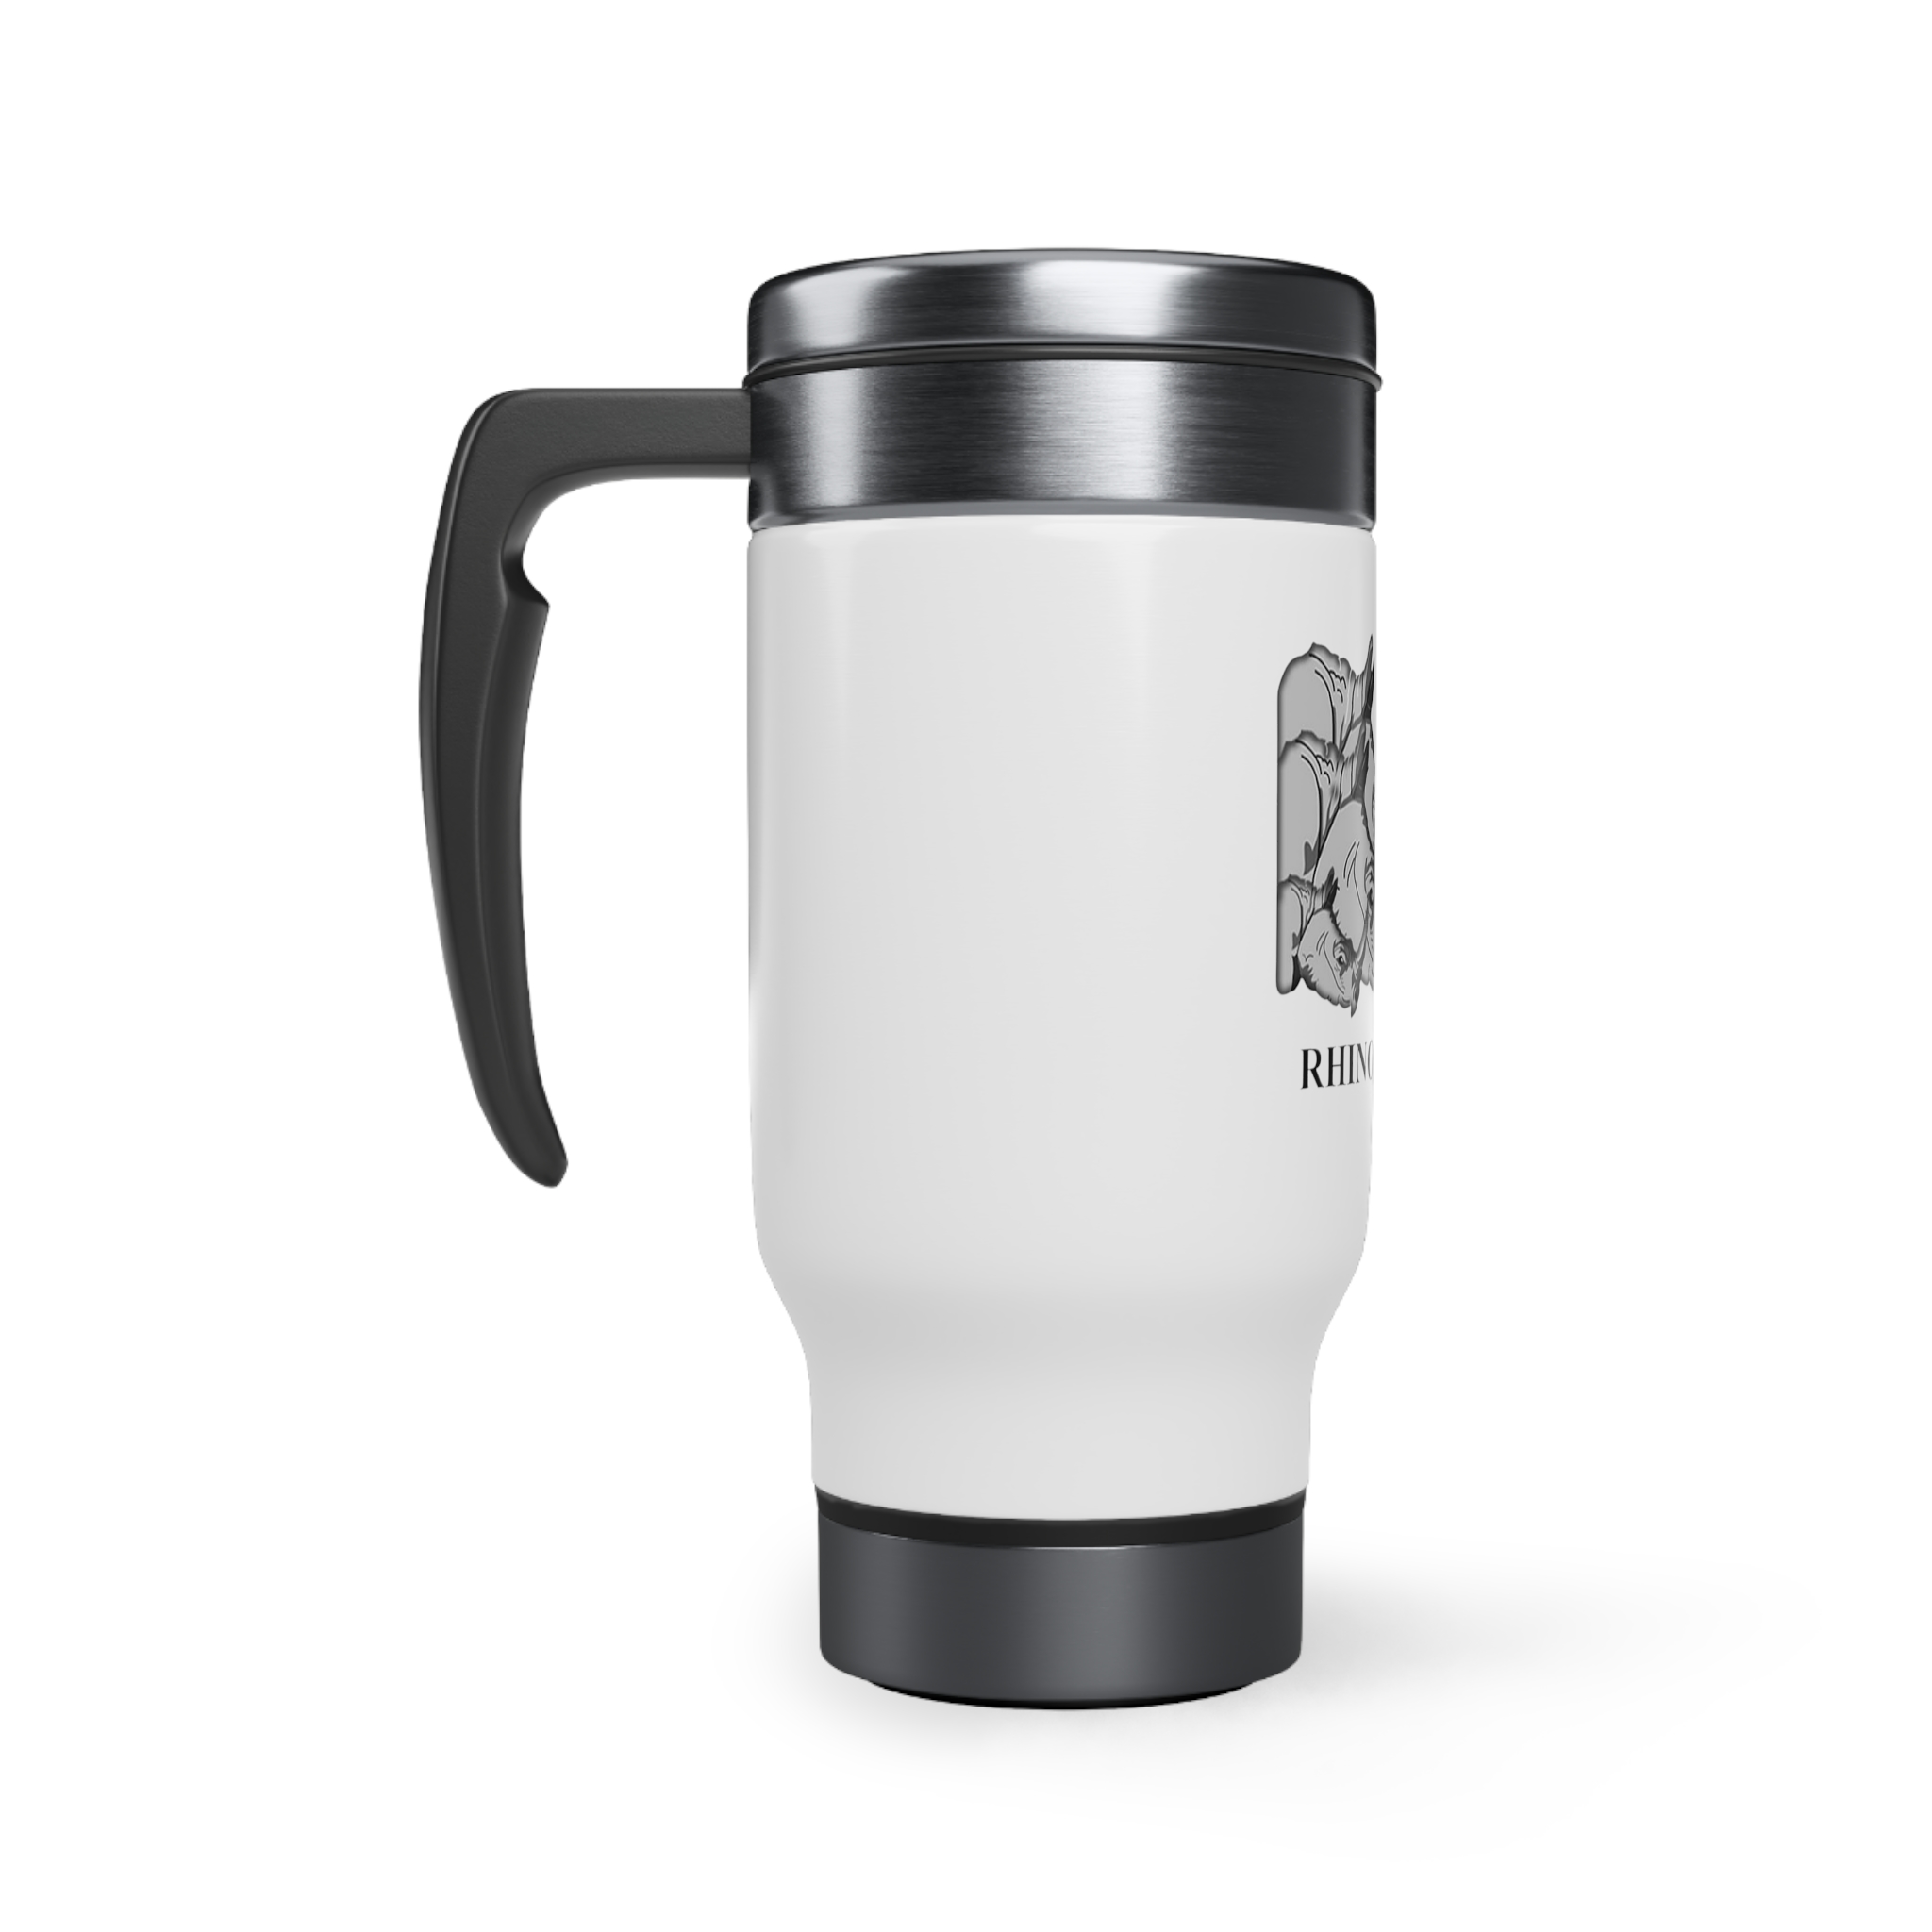 RN Stainless Steel Travel Mug - Side view